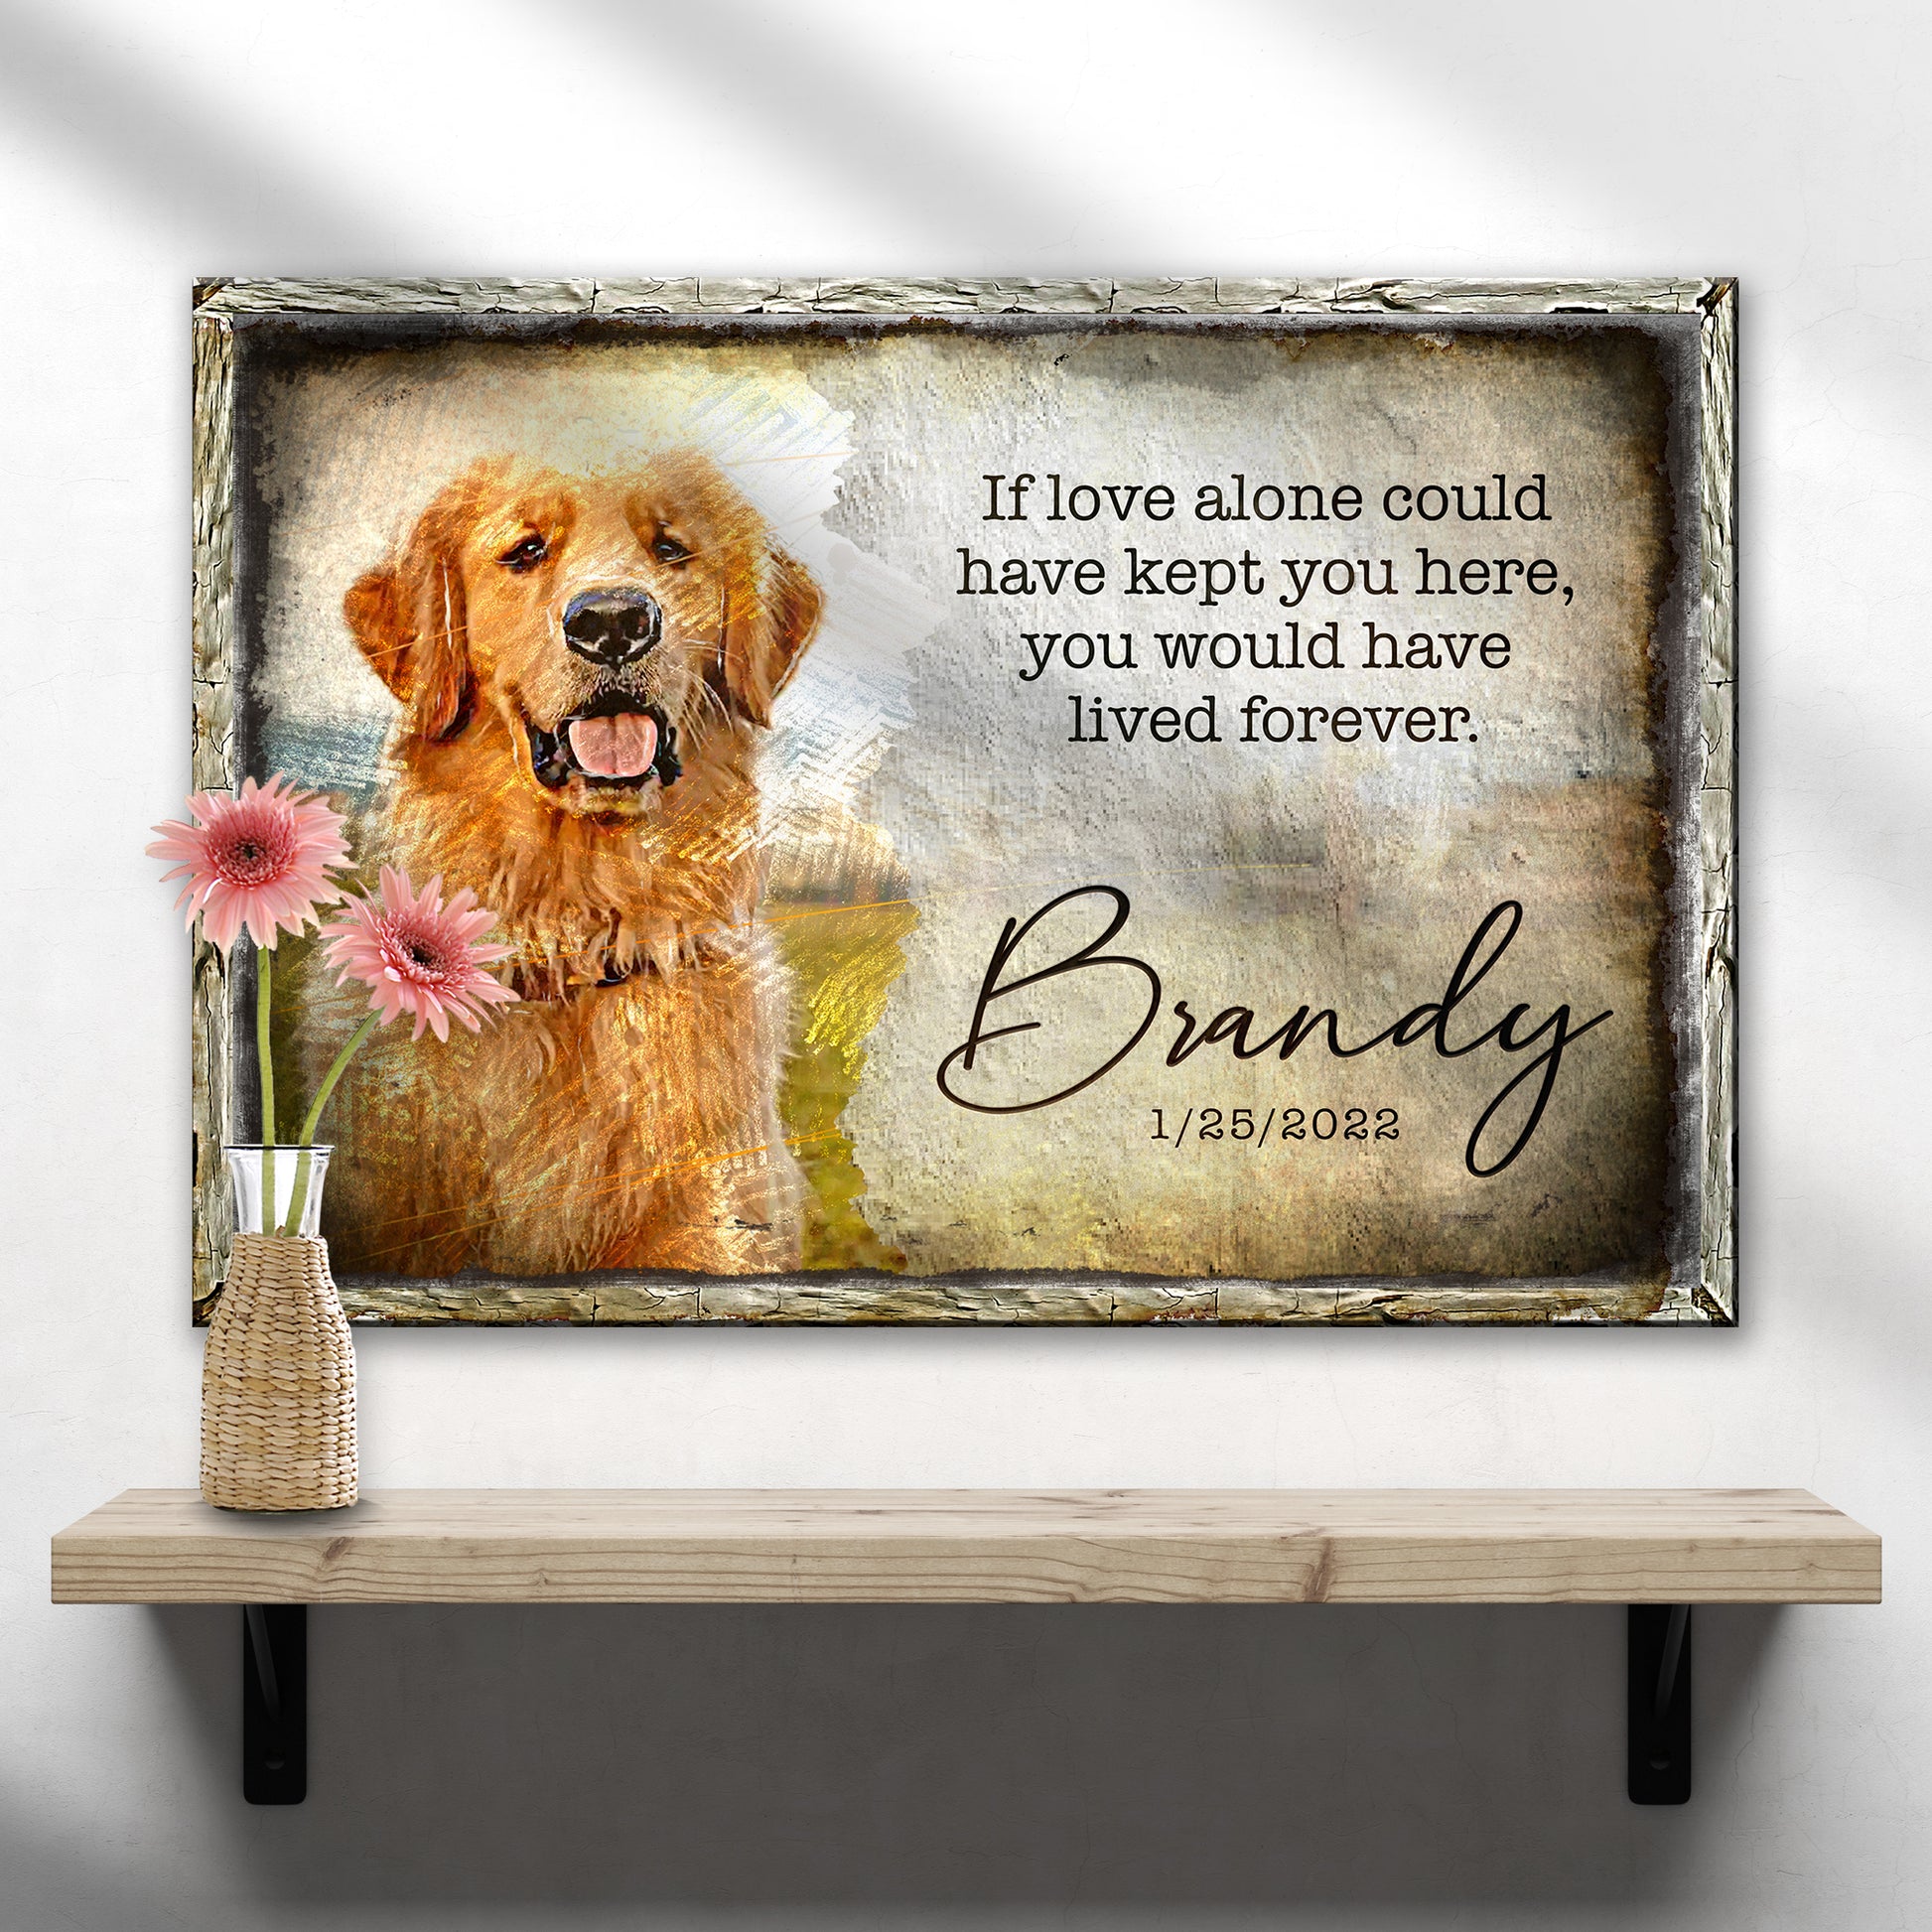 If Love Alone Can Kept You Here Pet Memorial Sign - Image by Tailored Canvases